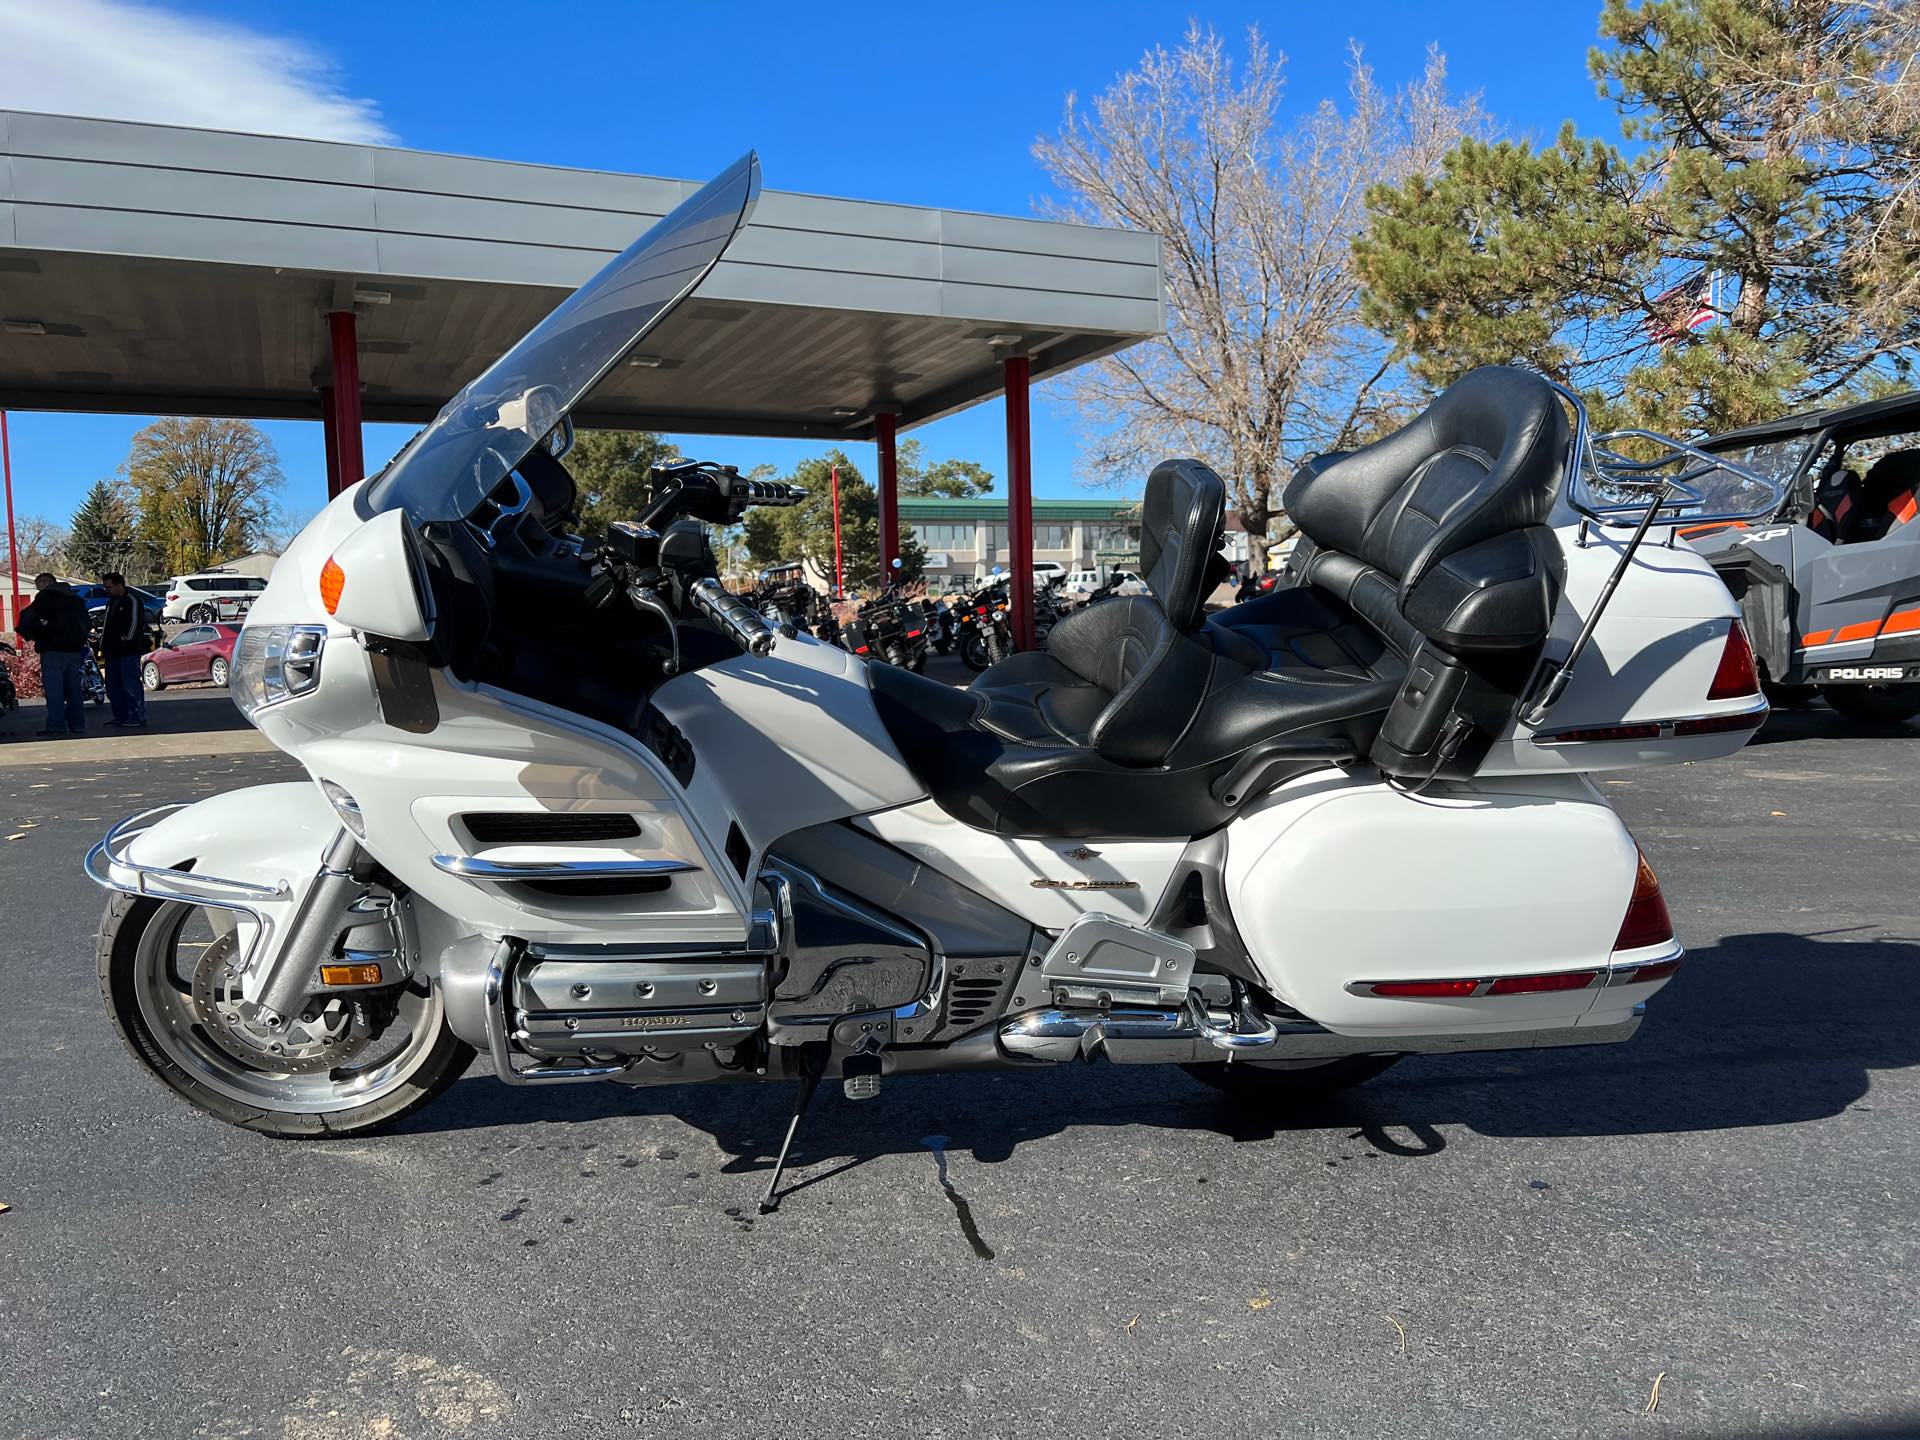 2004 Honda Gold Wing Base at Aces Motorcycles - Fort Collins